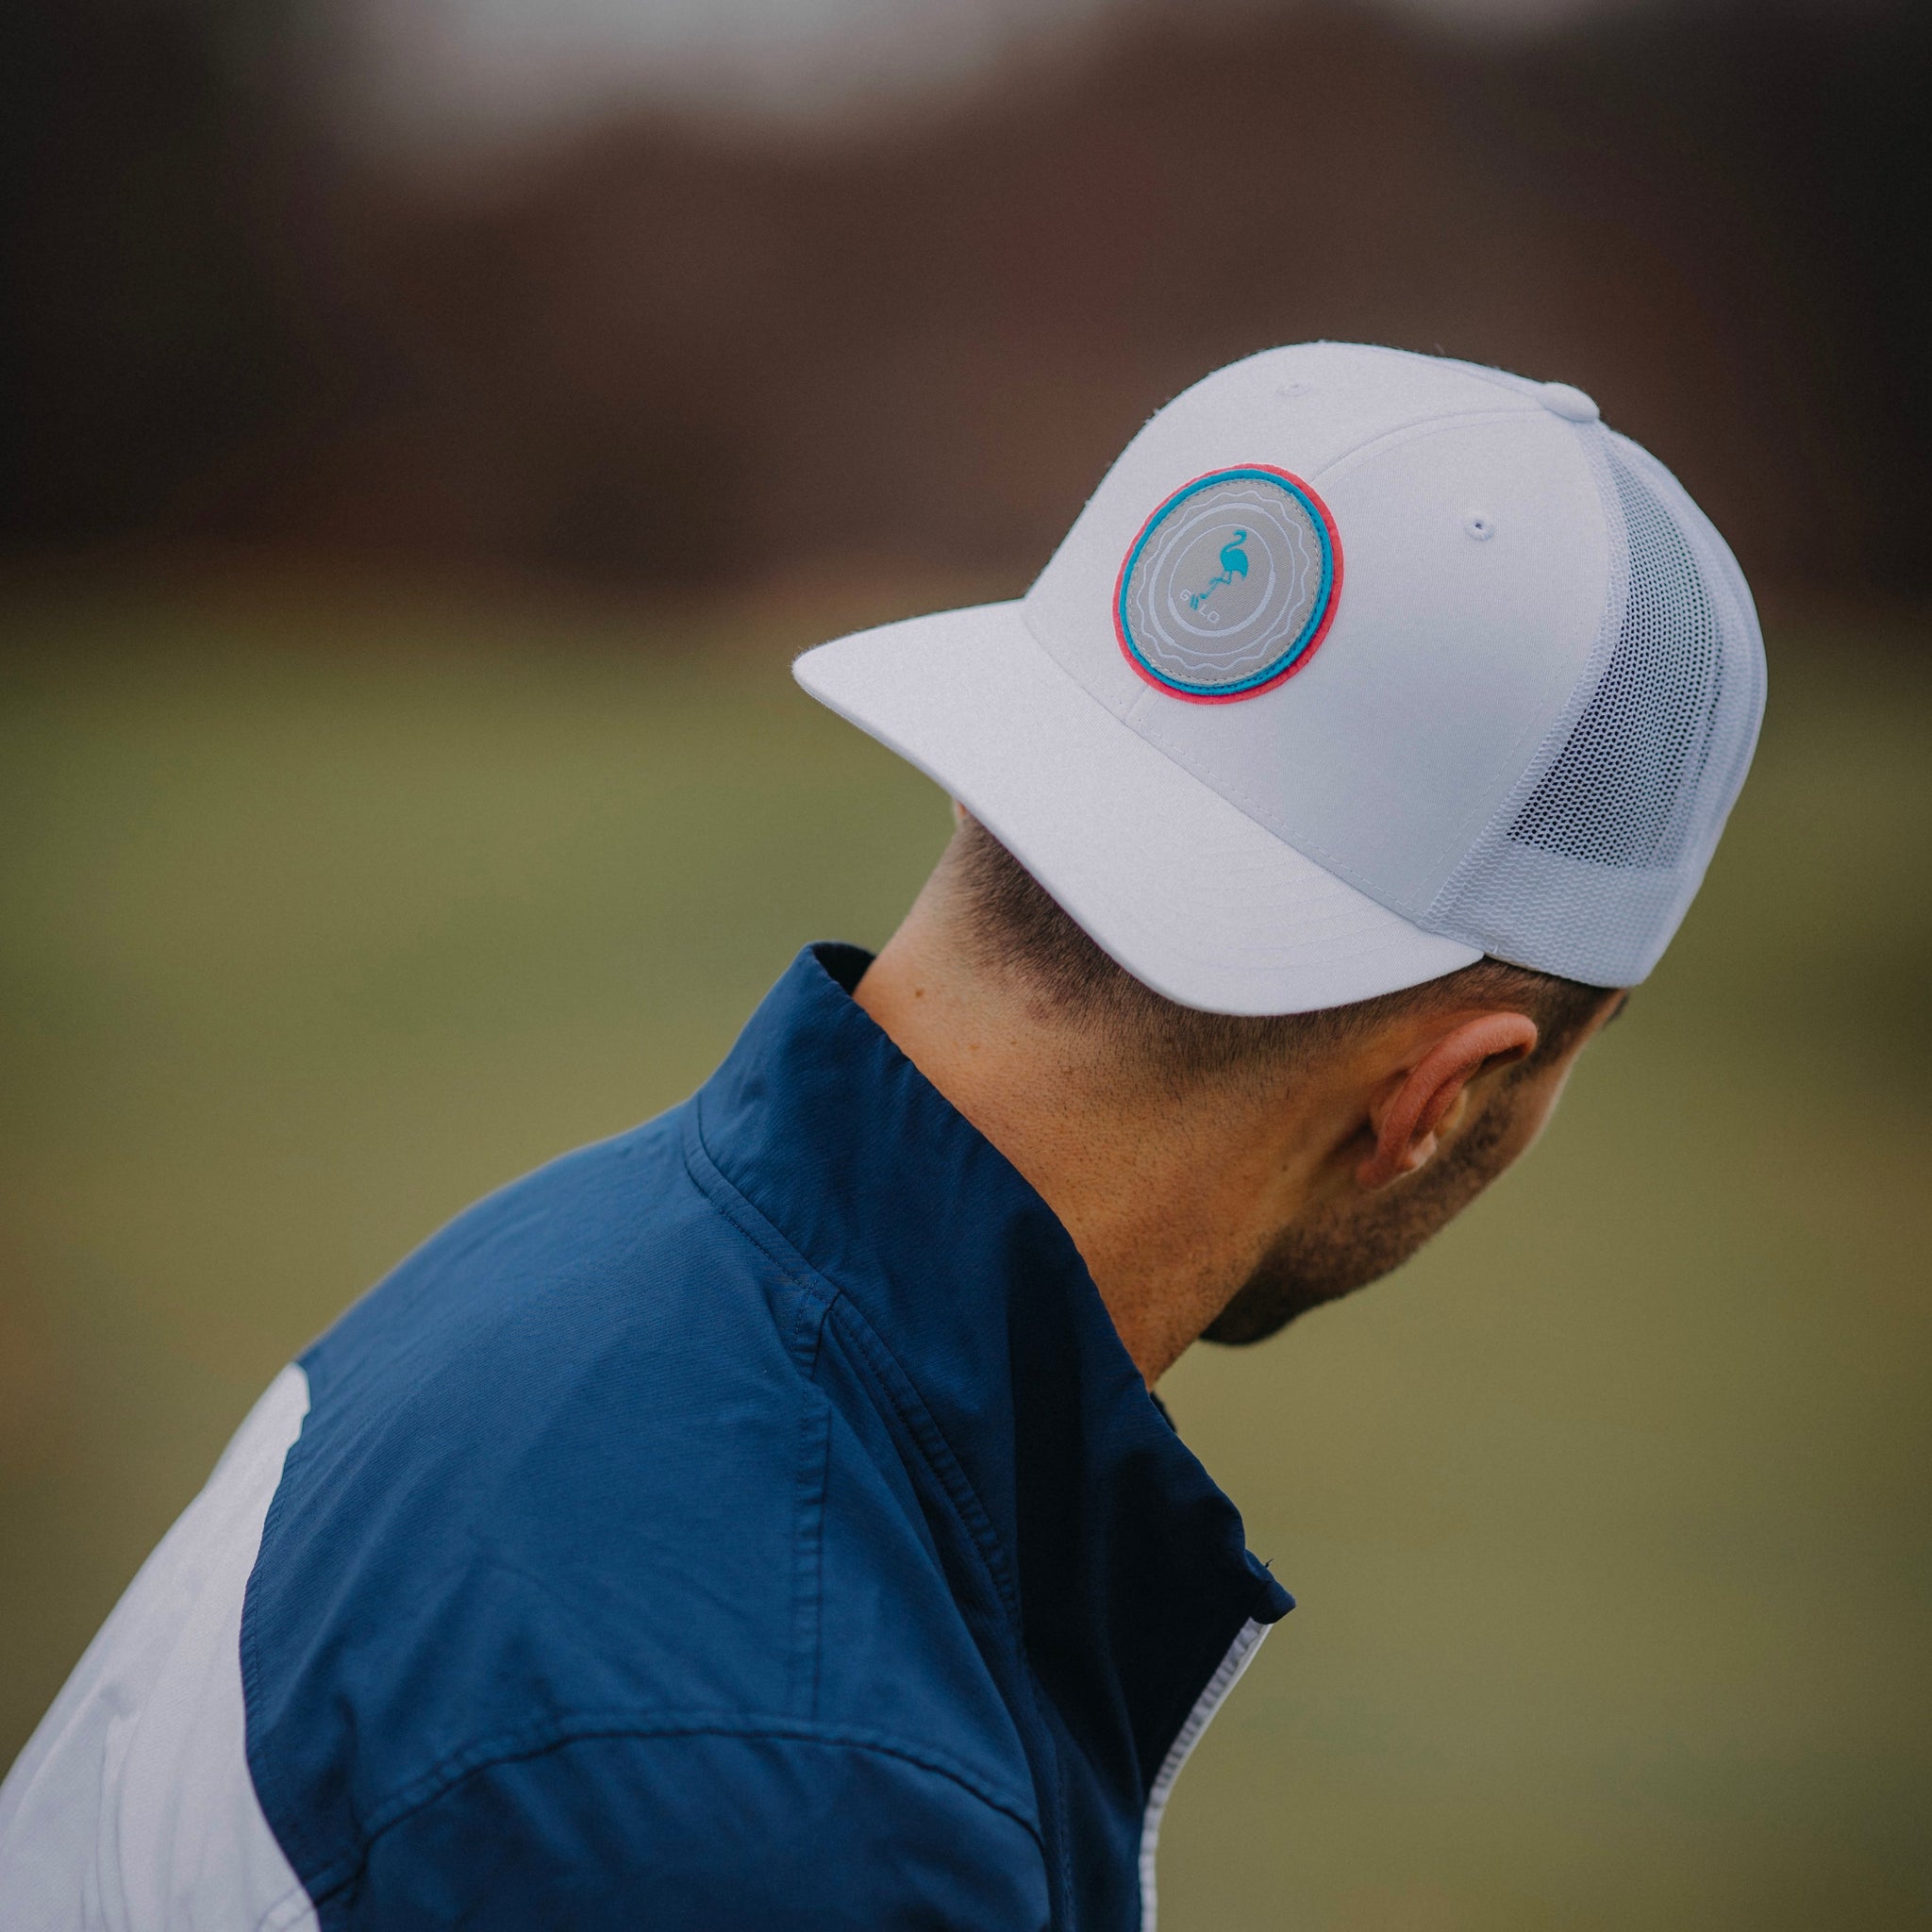 Need A Gift For Your Fellow Golfer? Look No Further Than G\\LO